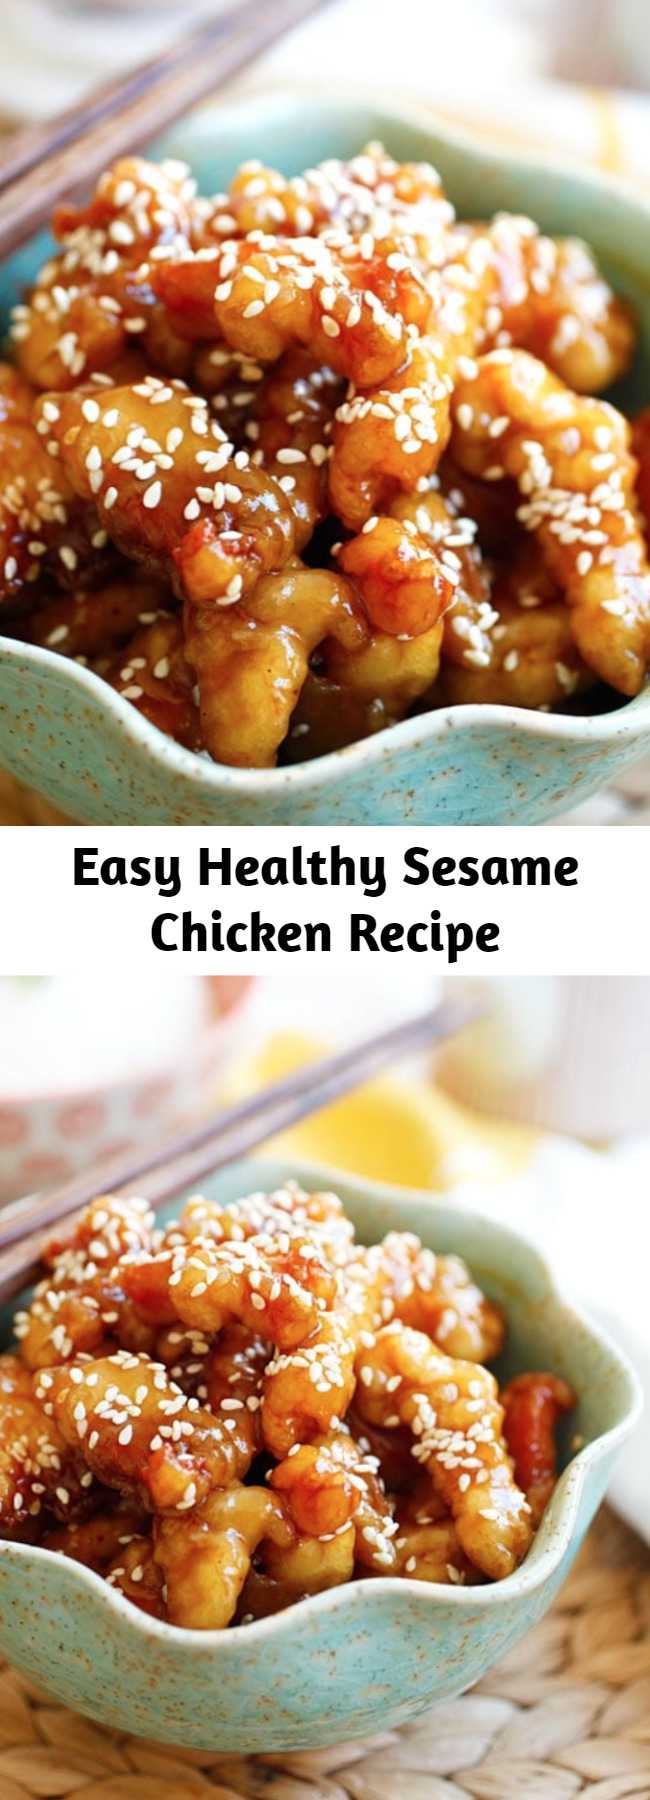 Easy Healthy Sesame Chicken Recipe - This is the best Sesame Chicken recipe with crispy chicken in sweet and savory sesame chicken sauce. It tastes just like Chinese restaurants and takes only 20 mins to make. Serve the chicken with steamed rice for an authentic homemade Chinese meal. #chinesefood #chicken